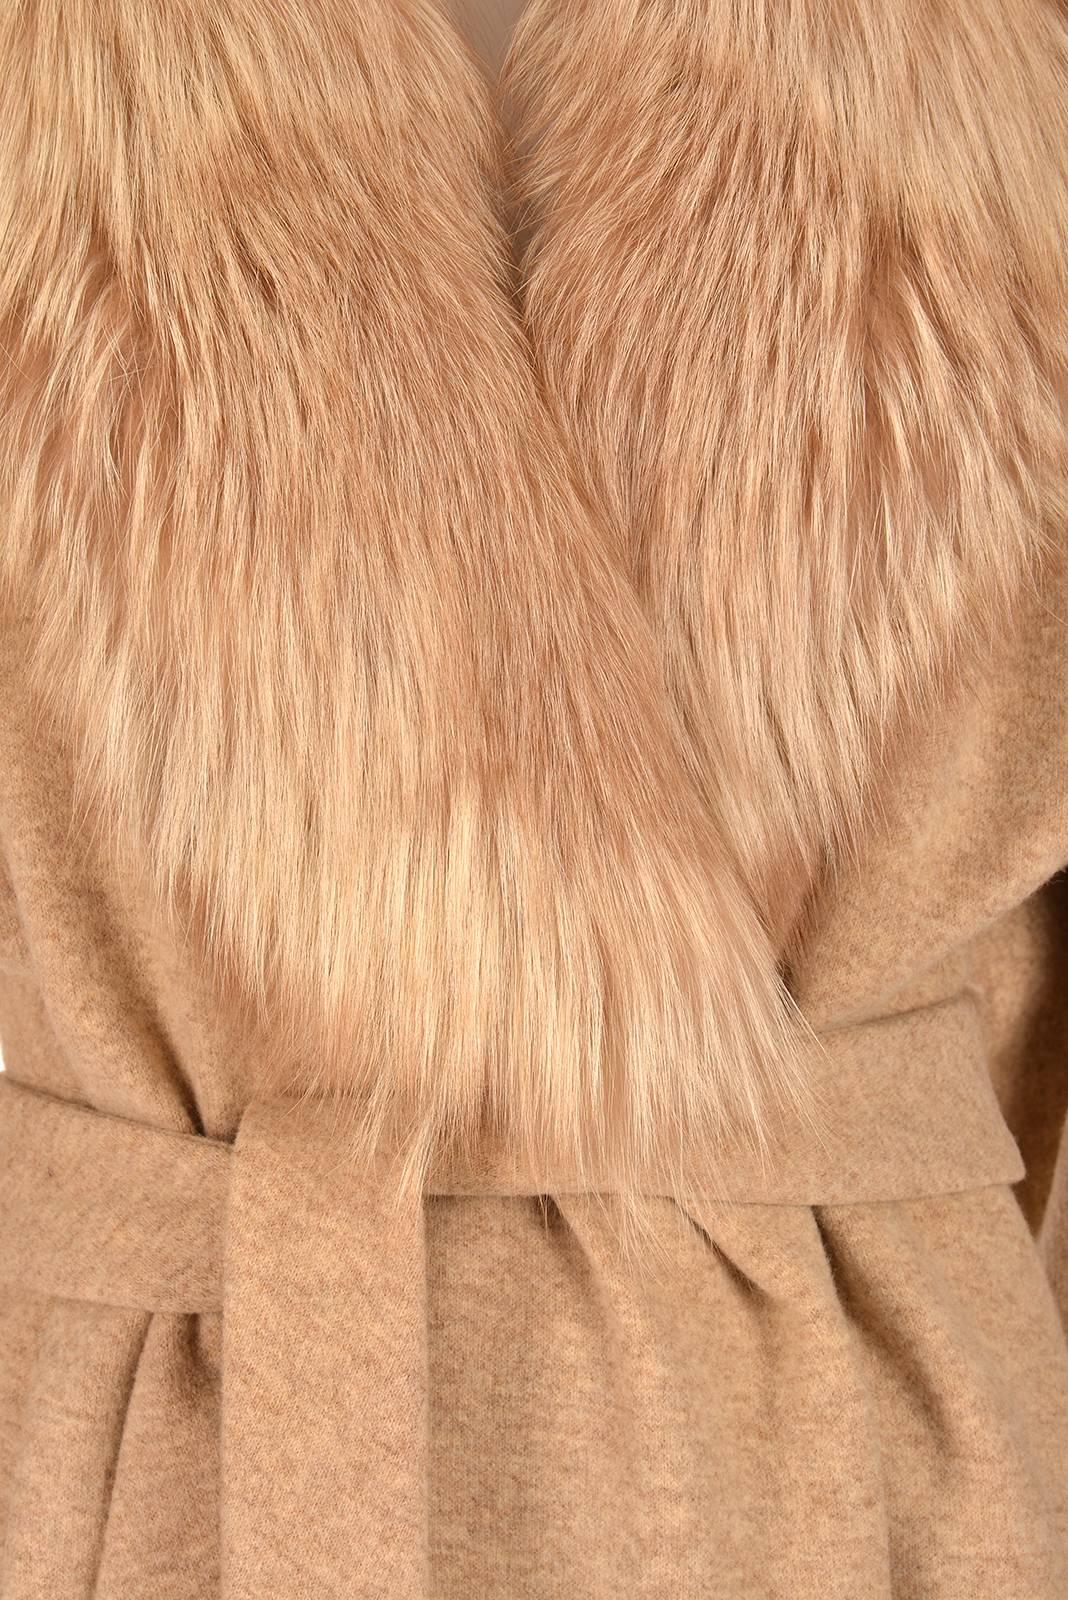 Beige Bill Blass Camel Colored Wool and Fox Fur Coat, Late 1970s  For Sale